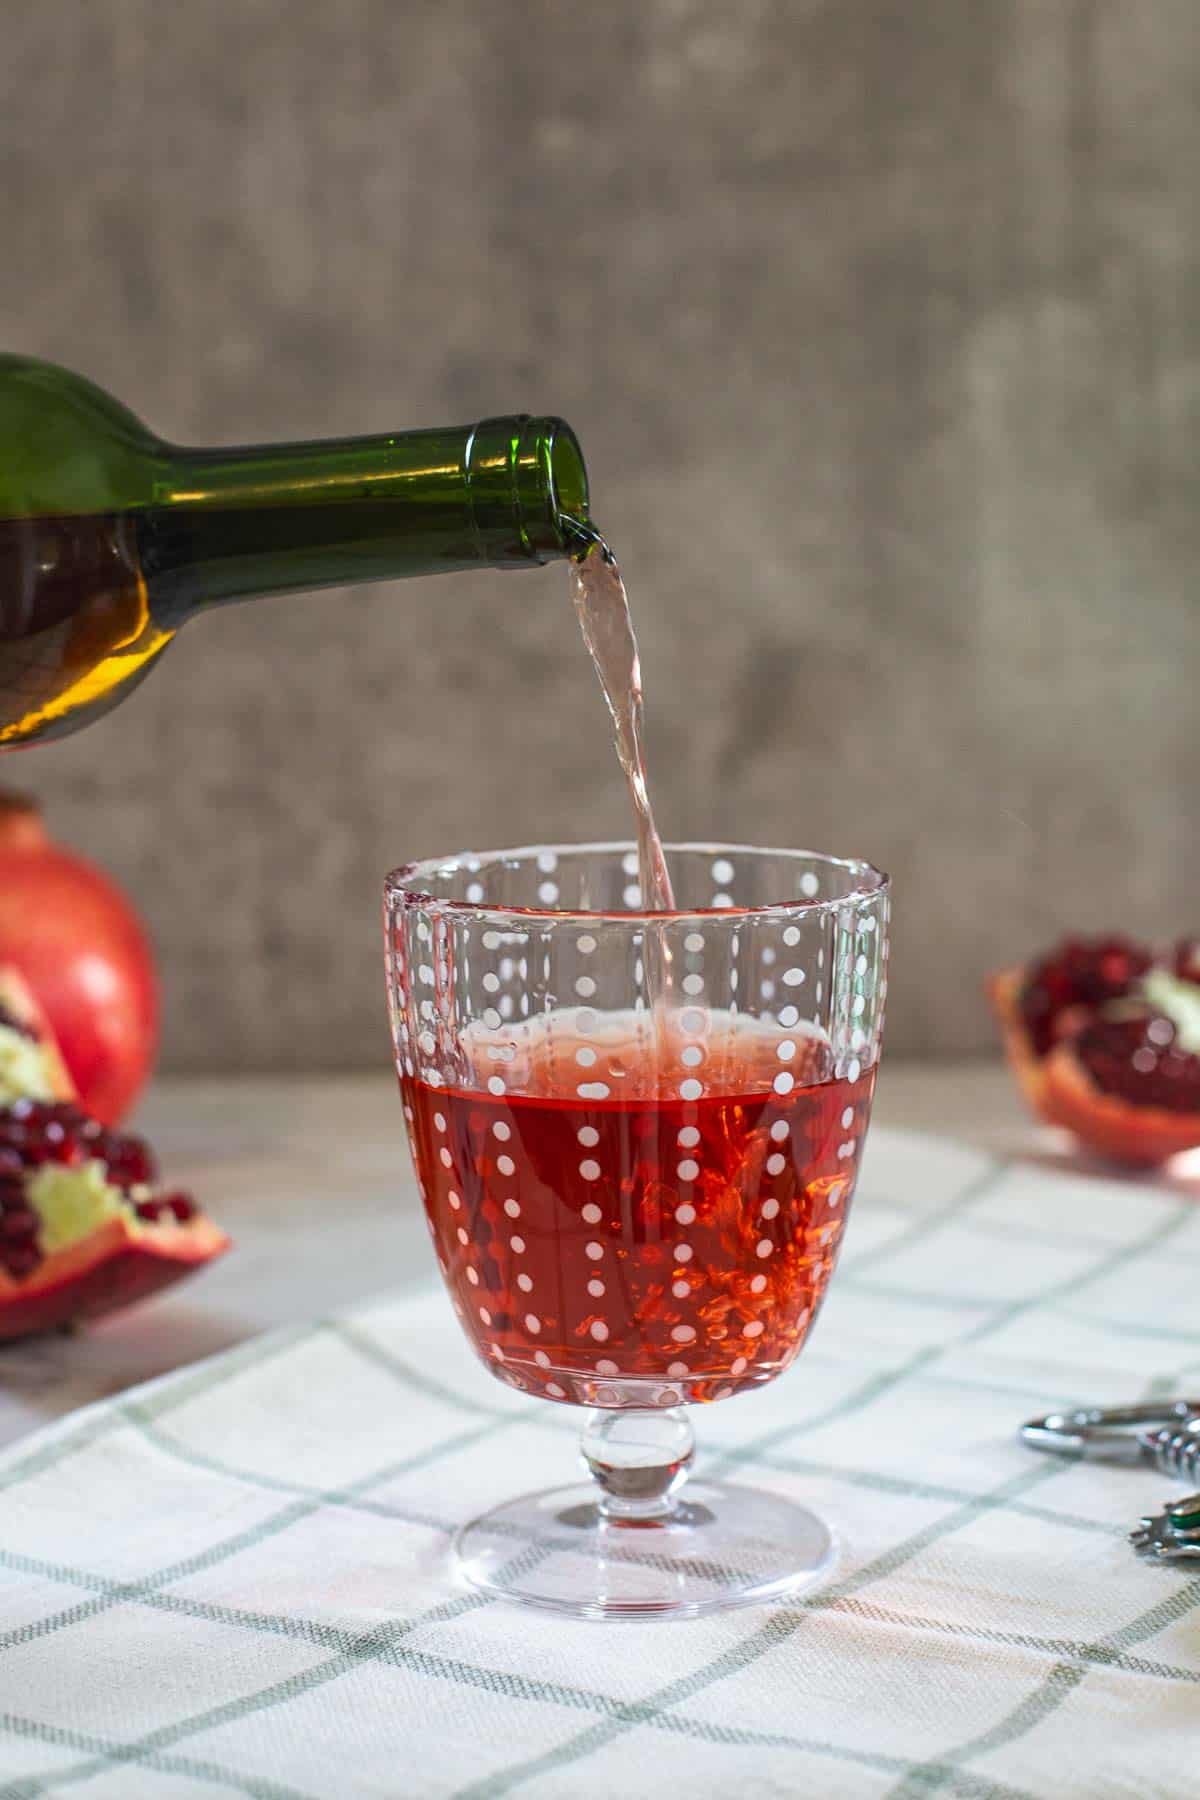 wine bottle pouring pomegranate wine into goblet with split pomegranates on the side